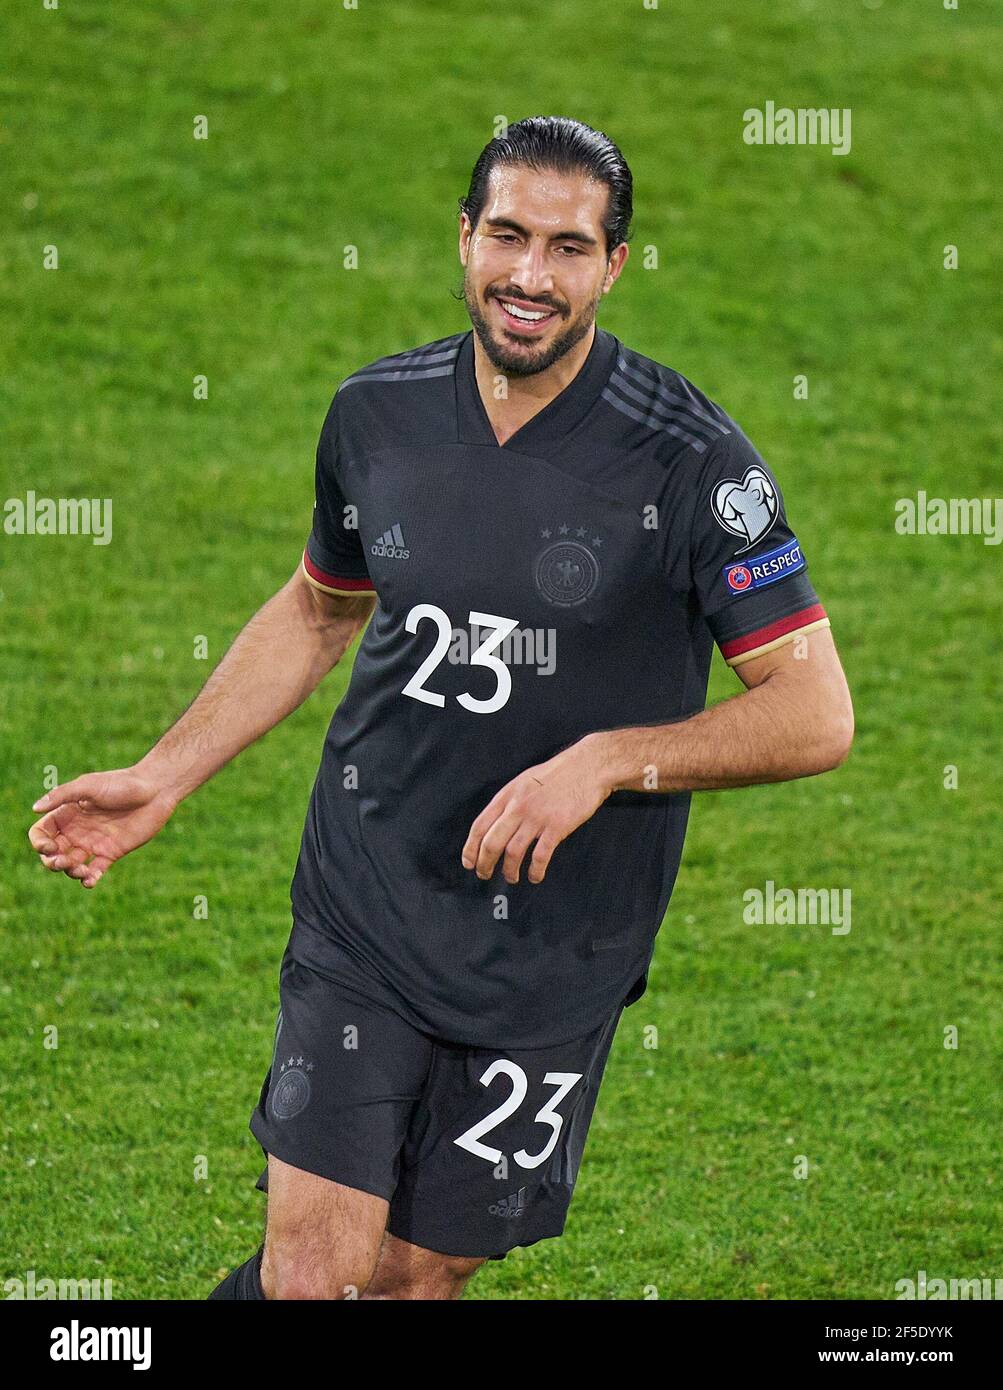 Emre CAN, DFB 23  half-size, portrait, one person, single, Aktion, Einzelbild, angeschnittenes Einzelmotiv, Halbfigur, halbe Figur,  in the match GERMANY - ICELAND 3-0 Deutschland - ISLAND 3-0 Qualification for World Championships, WM Quali, Season 2020/2021,  March 25, 2021  in Duisburg, Germany.  © Peter Schatz / Alamy Live News  Important: DFB regulations prohibit any use of photographs as image sequences and/or quasi-video. Stock Photo